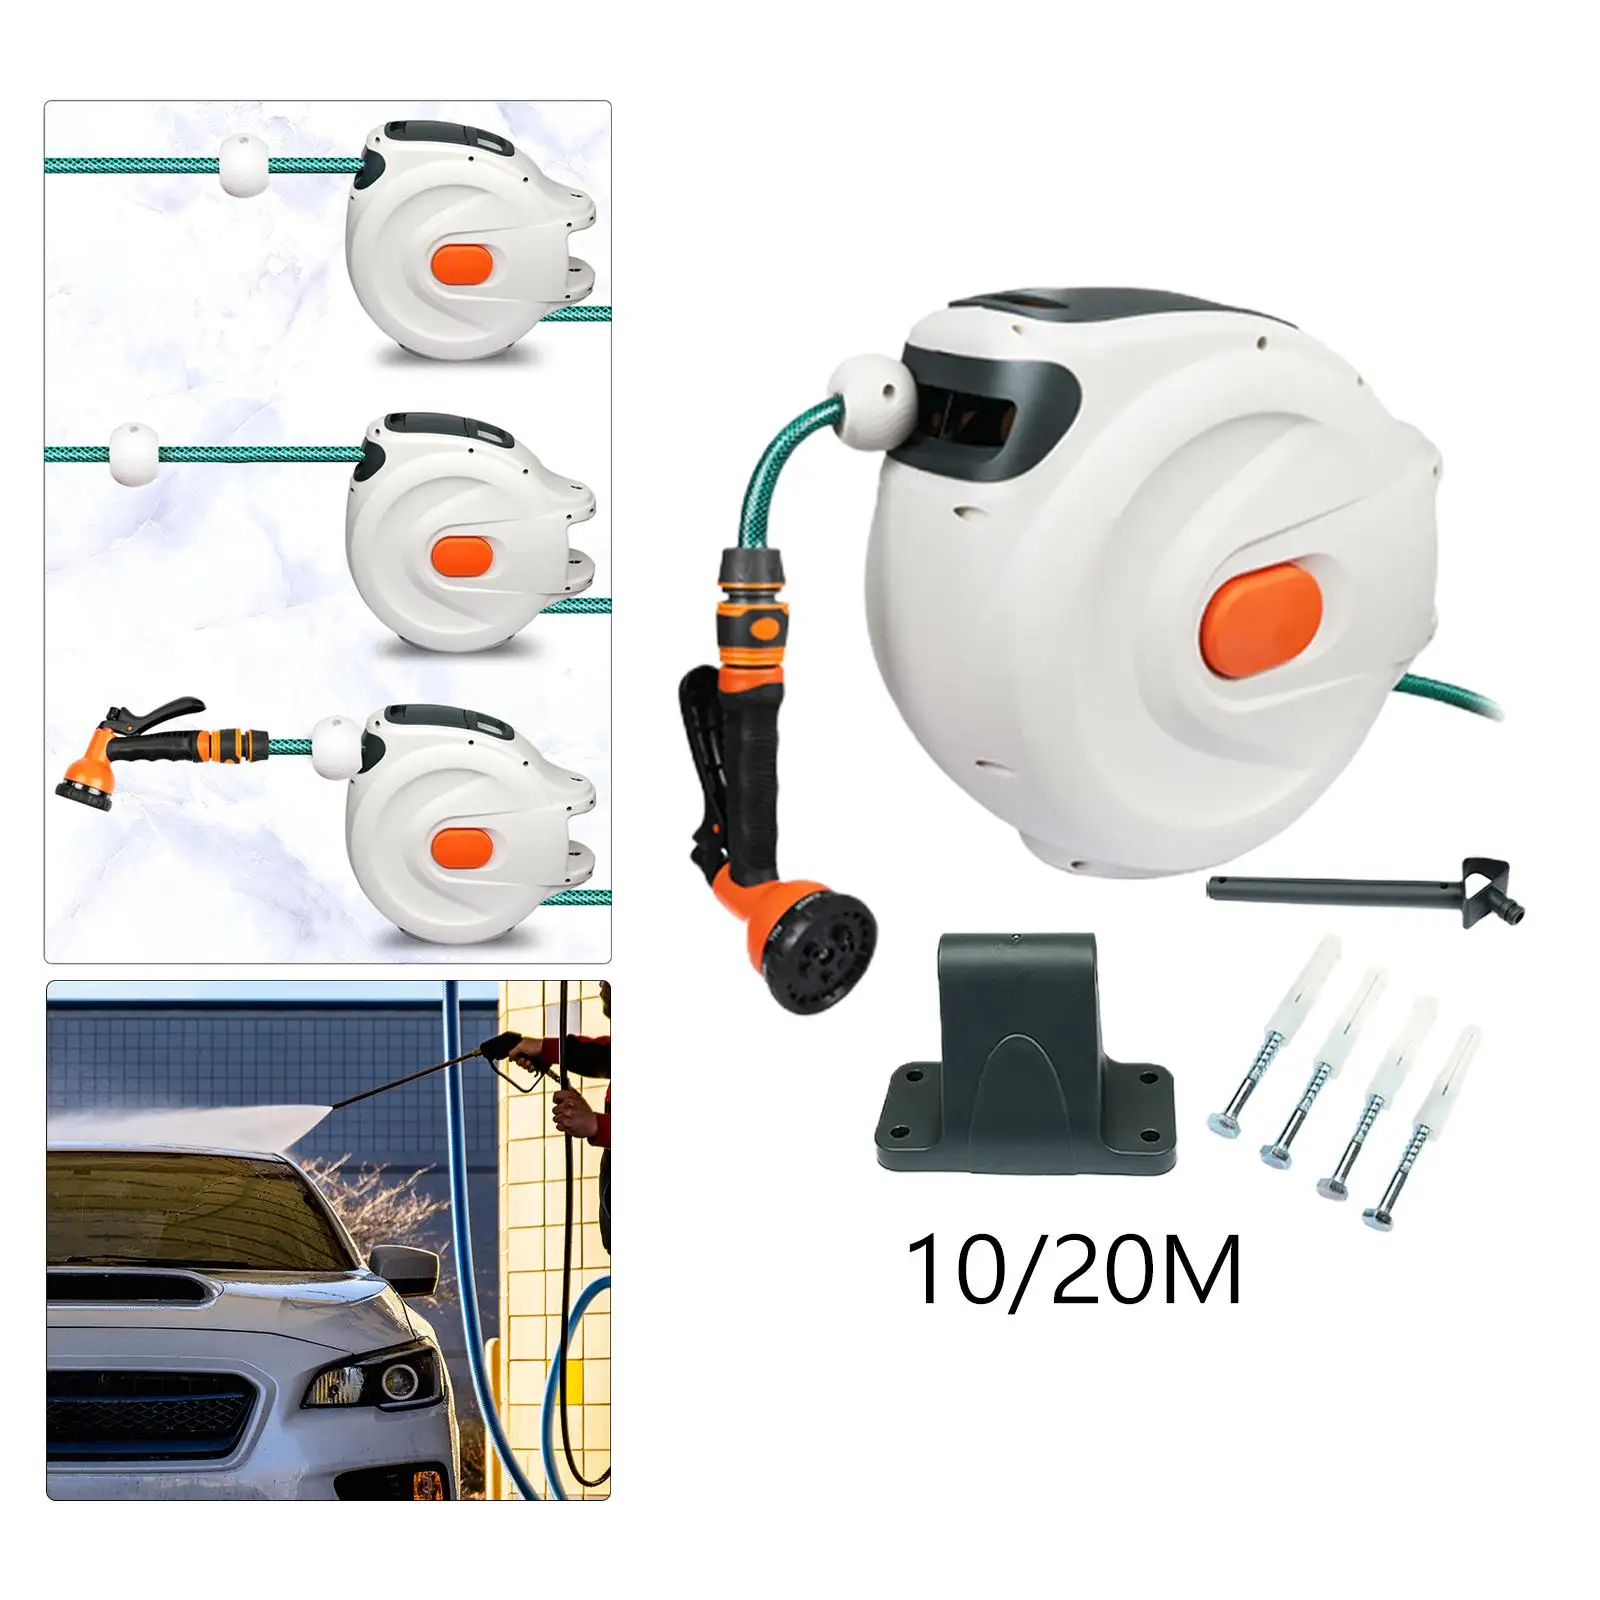 10/20m Automatic Rewind Hose Reel with 7 Pattern Hose Nozzle Water Hose  Reel Slow Return System for Car Garden - AliExpress